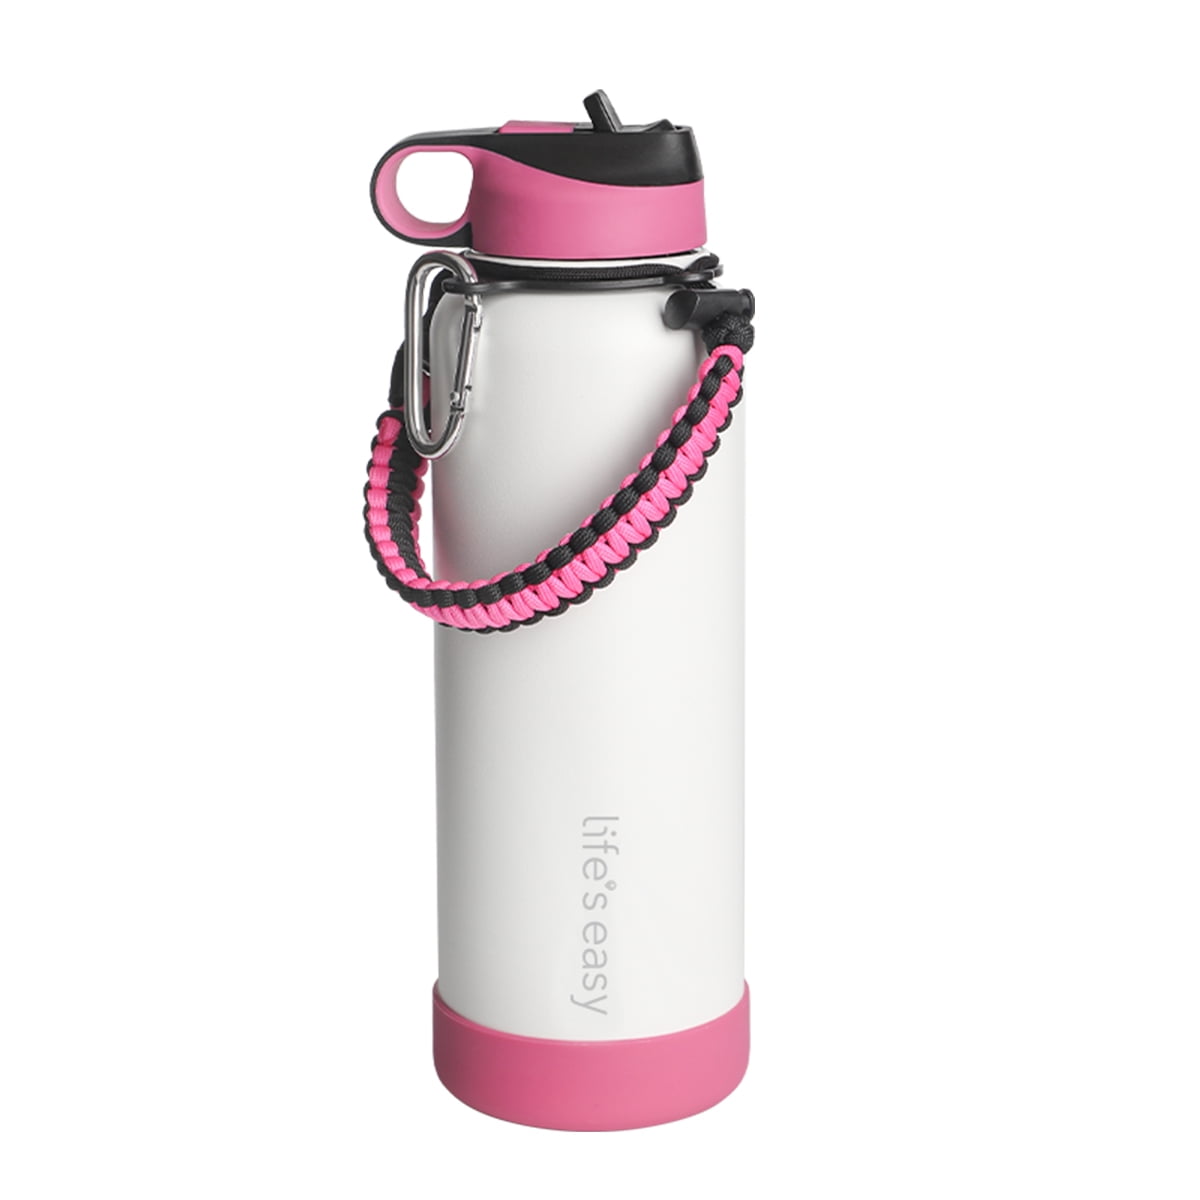  Pink Insulated Water Bottle - Includes 3 Lids (Straw Lid,  Spout/Chug, Carabiner handle), Leak Proof - 32 oz Water Bottles - by  ONEbottle : Sports & Outdoors